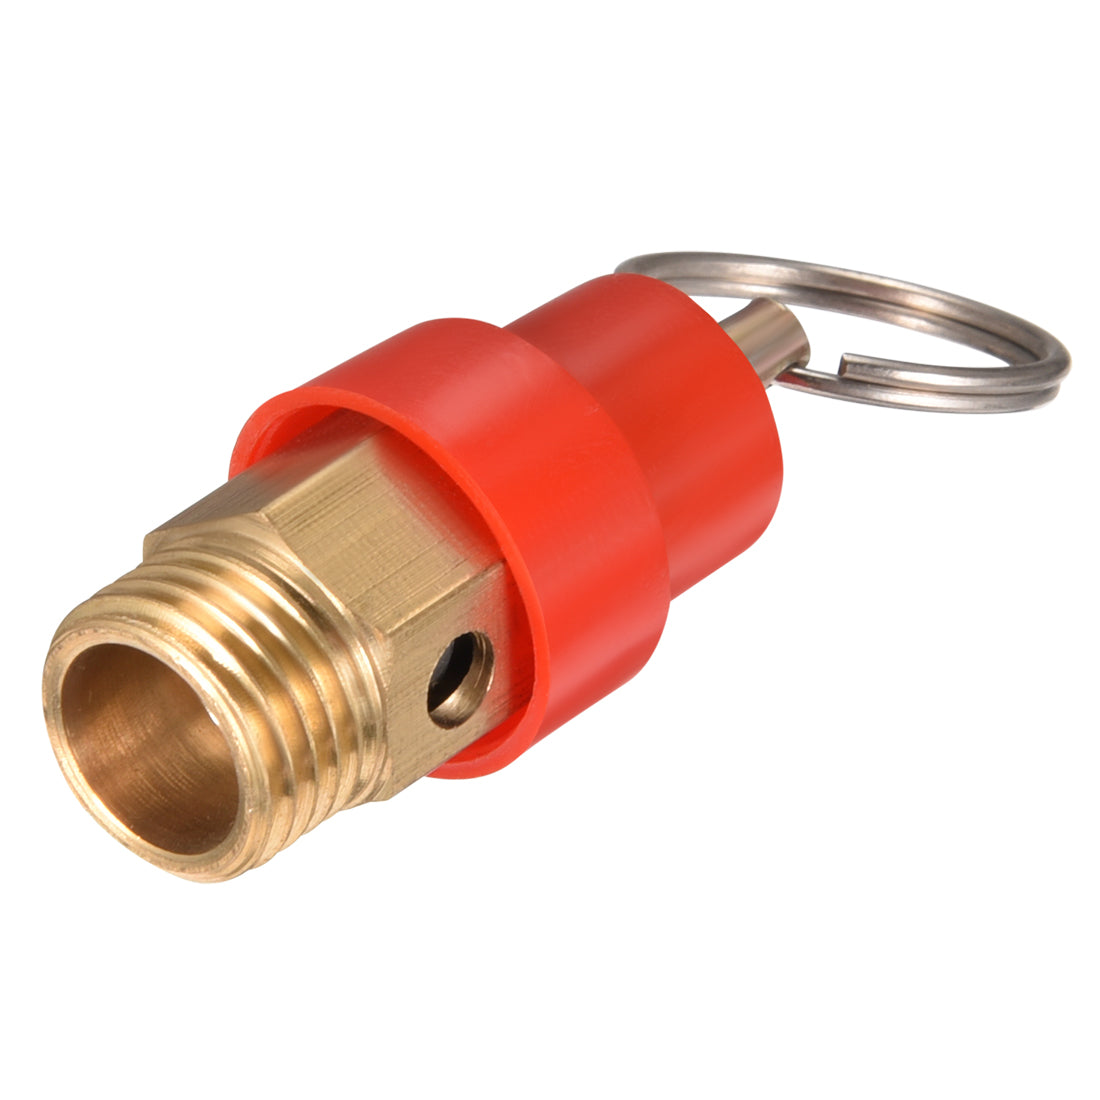 uxcell Uxcell 1/4 BSP Thread Pressure Relief Valve for Air Compressor 0.5Mpa Red Gold Tone w Split Ring